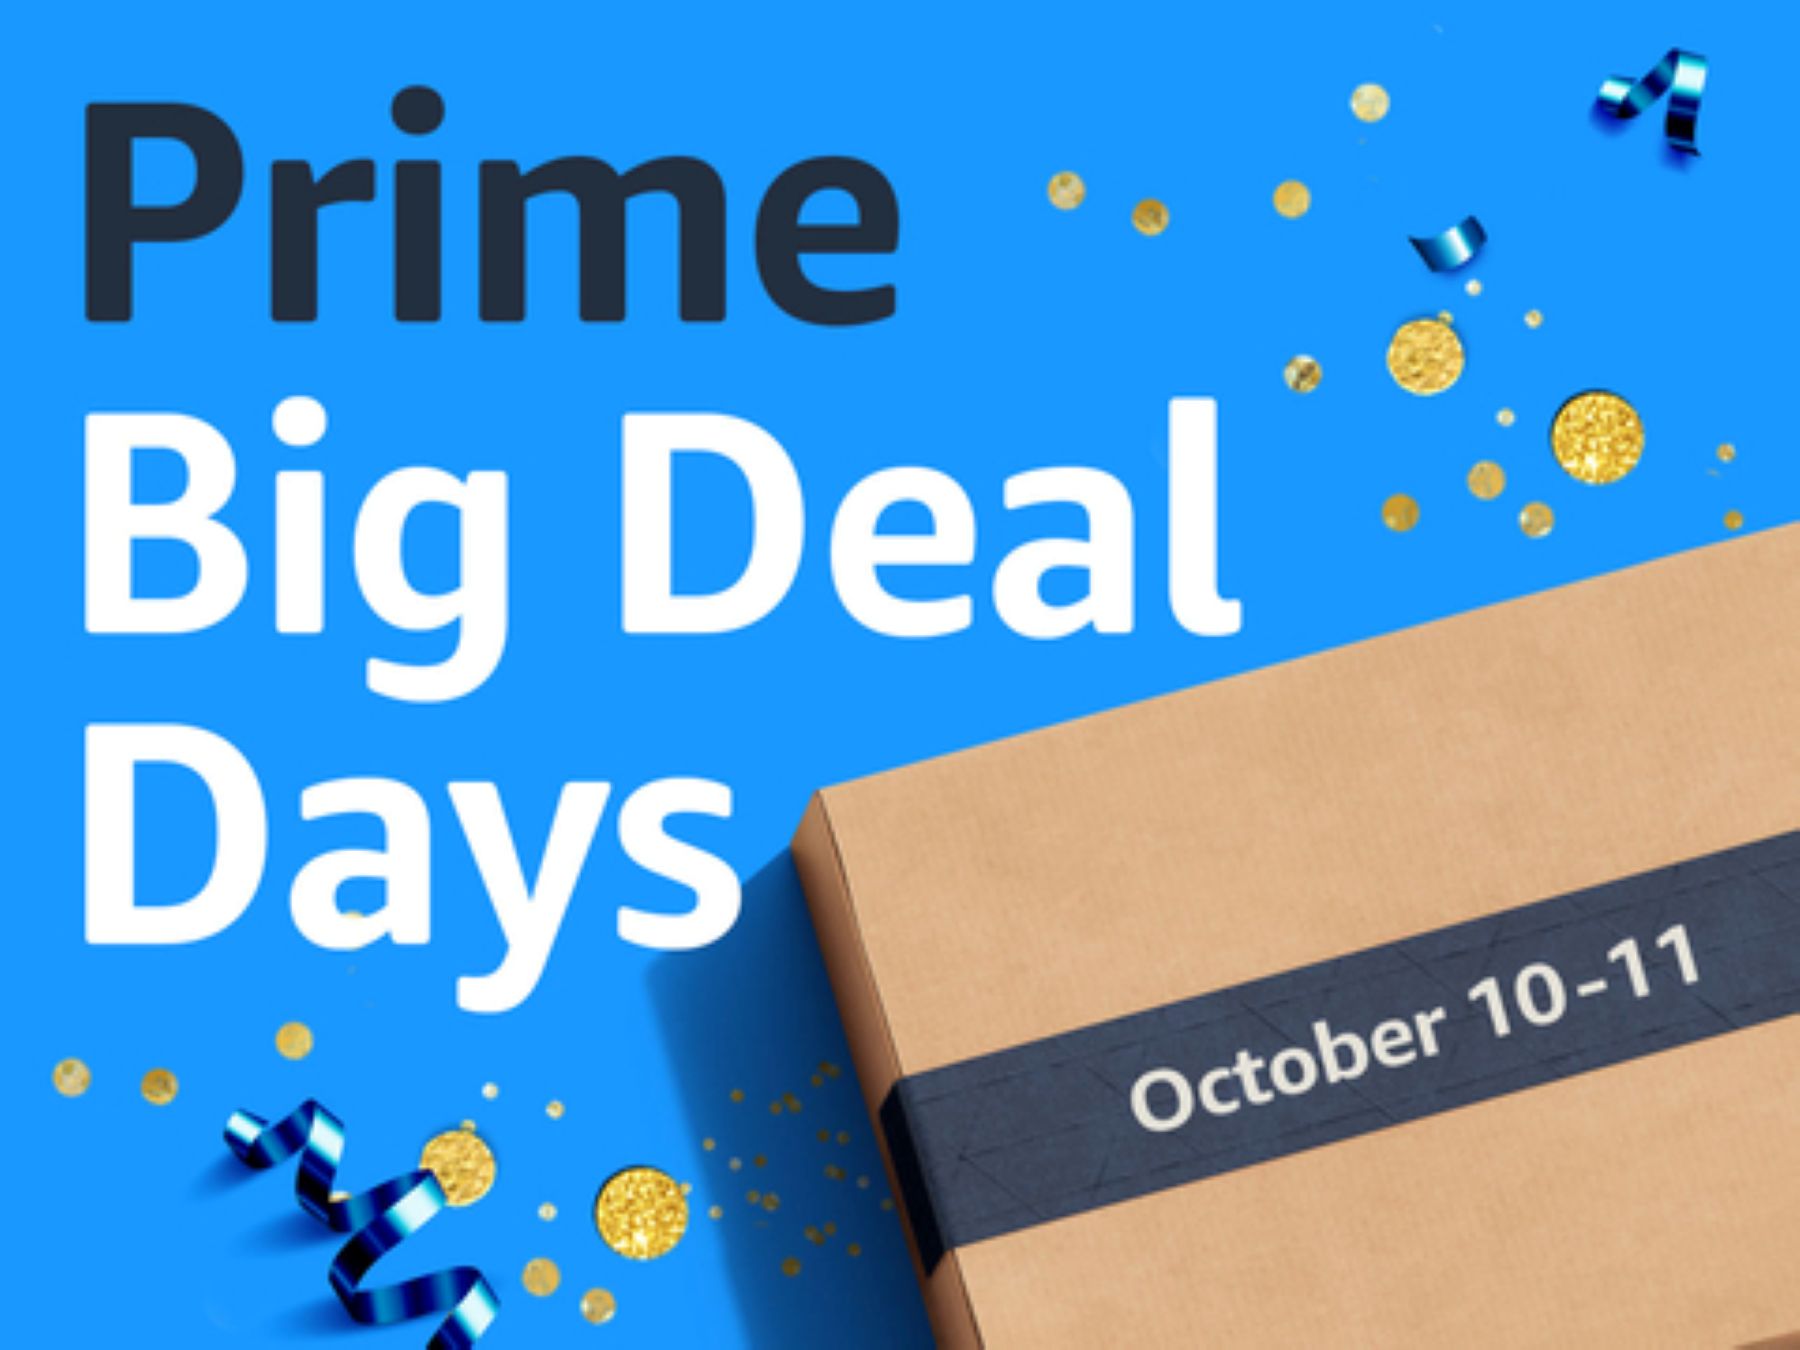  Shop Some of Amazon’s Best Early Holiday Deals—Exclusively for Prime Members—During Prime Big Deal Days, October 10-11